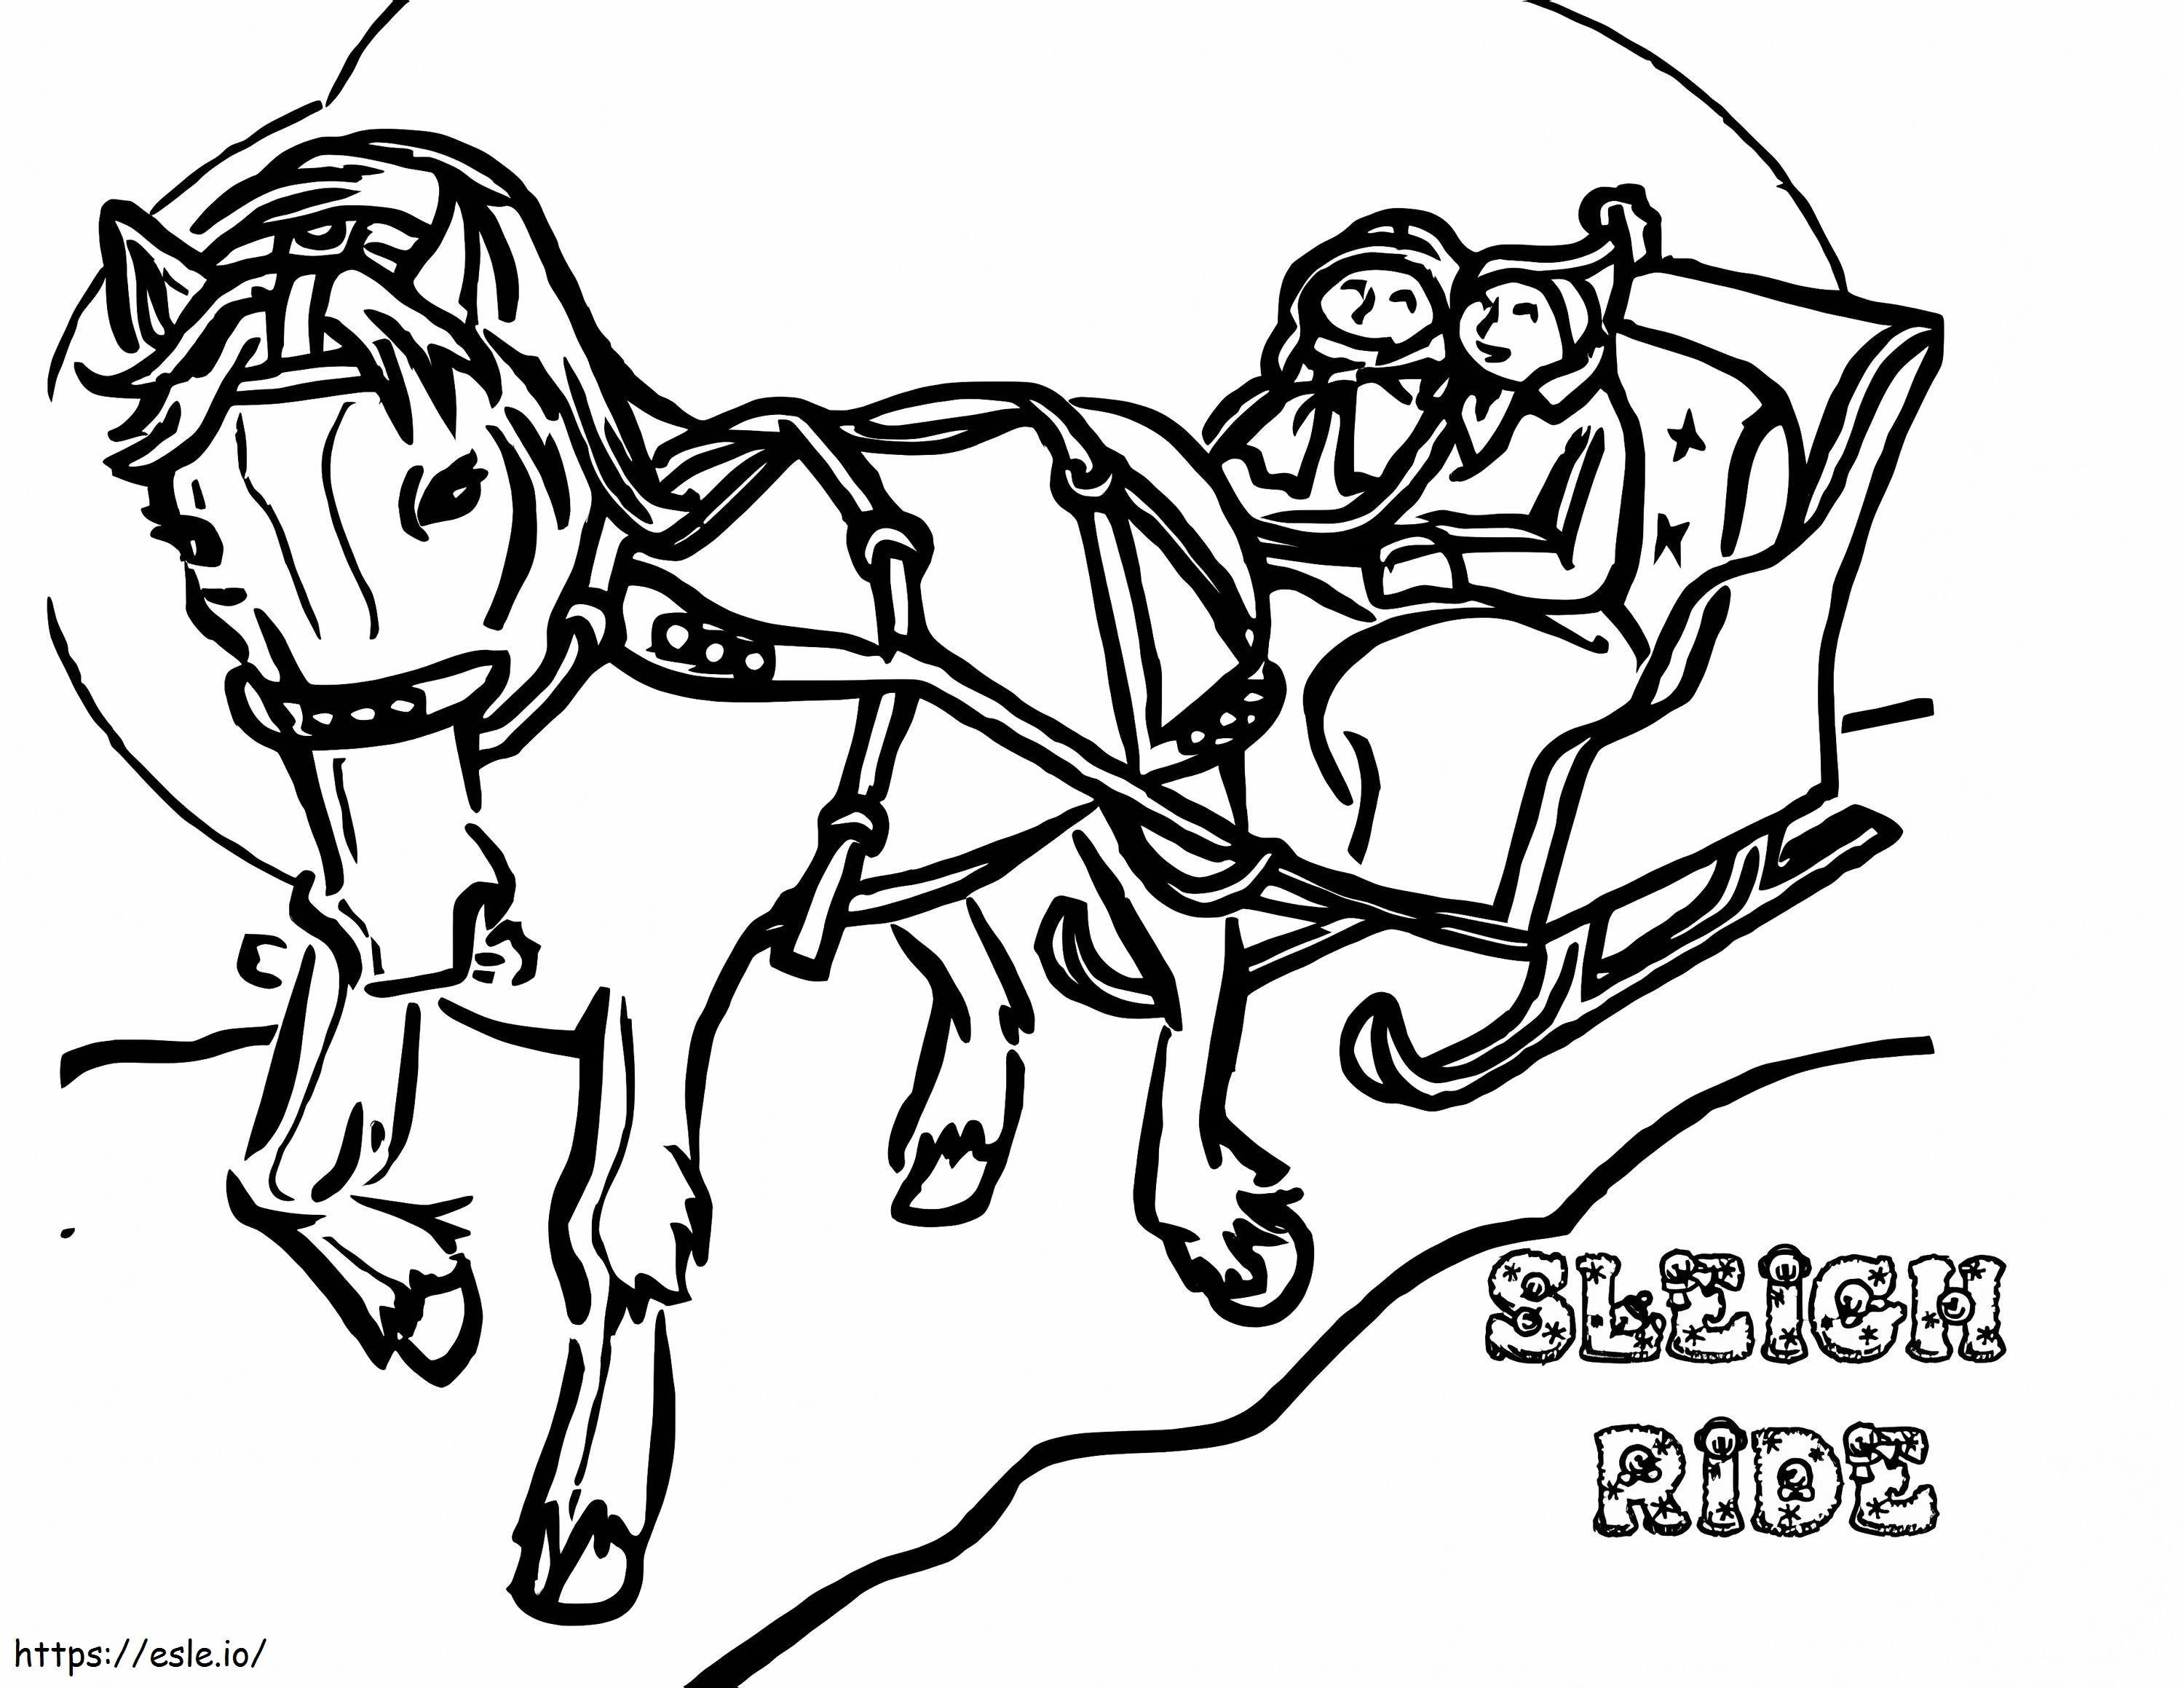 Sleigh Ride coloring page